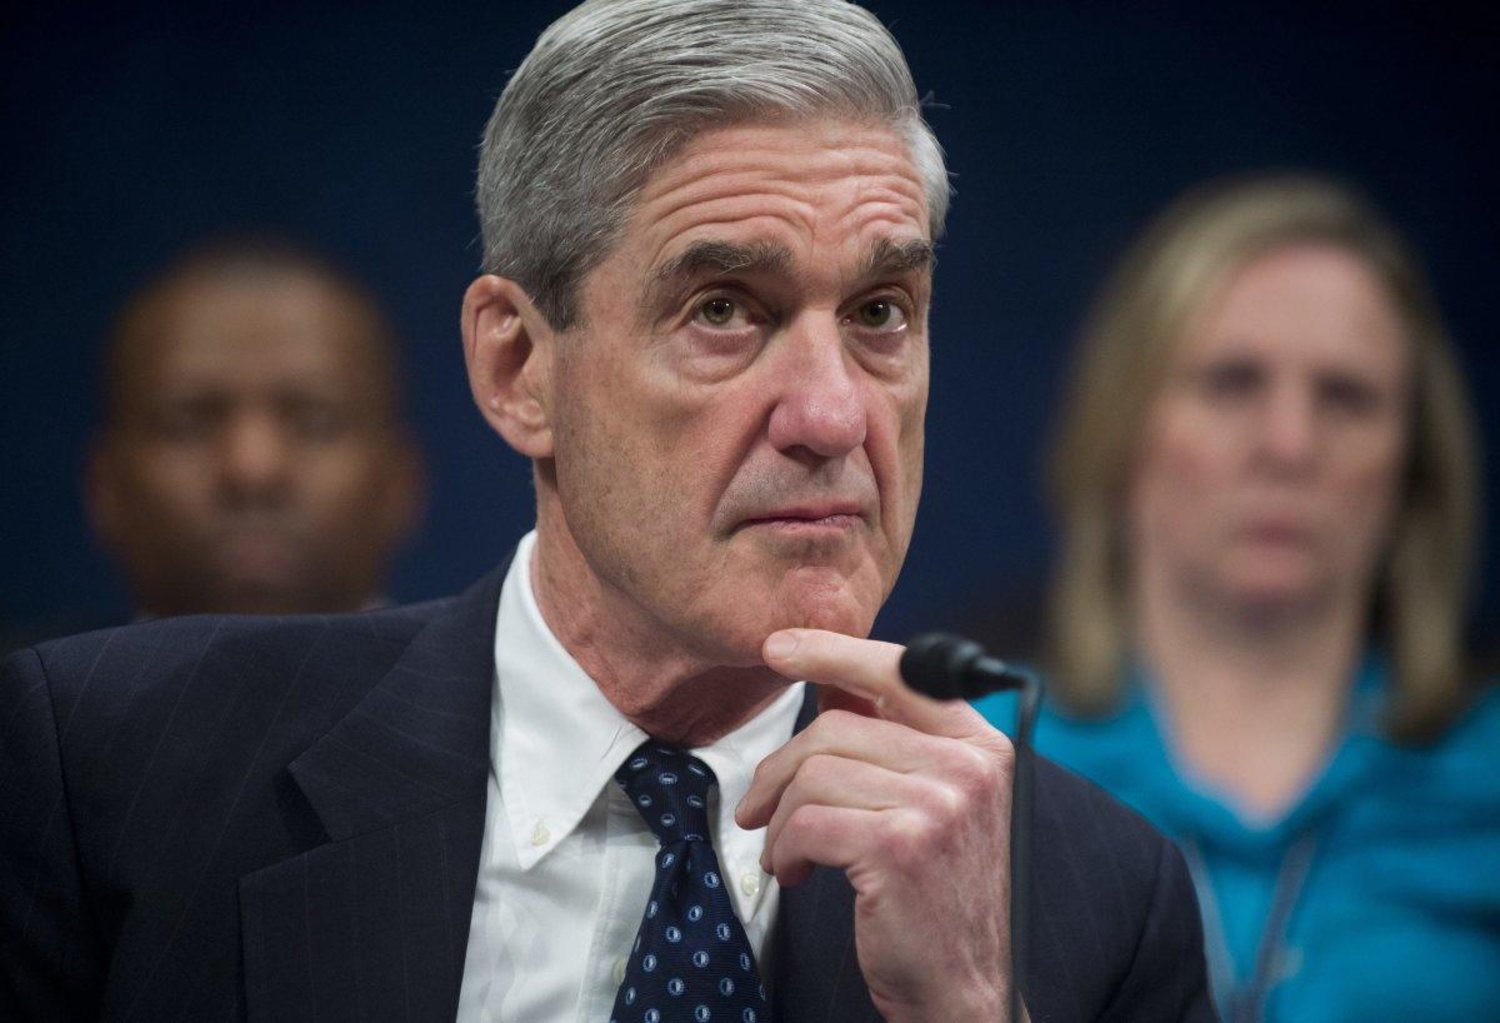 A federal grand jury in D.C. approved the first round of charges in special counsel Robert Mueller’s ongoing probe into Russia's meddling over the 2016 election. (SAUL LOEB/AFP/GETTY IMAGES)
